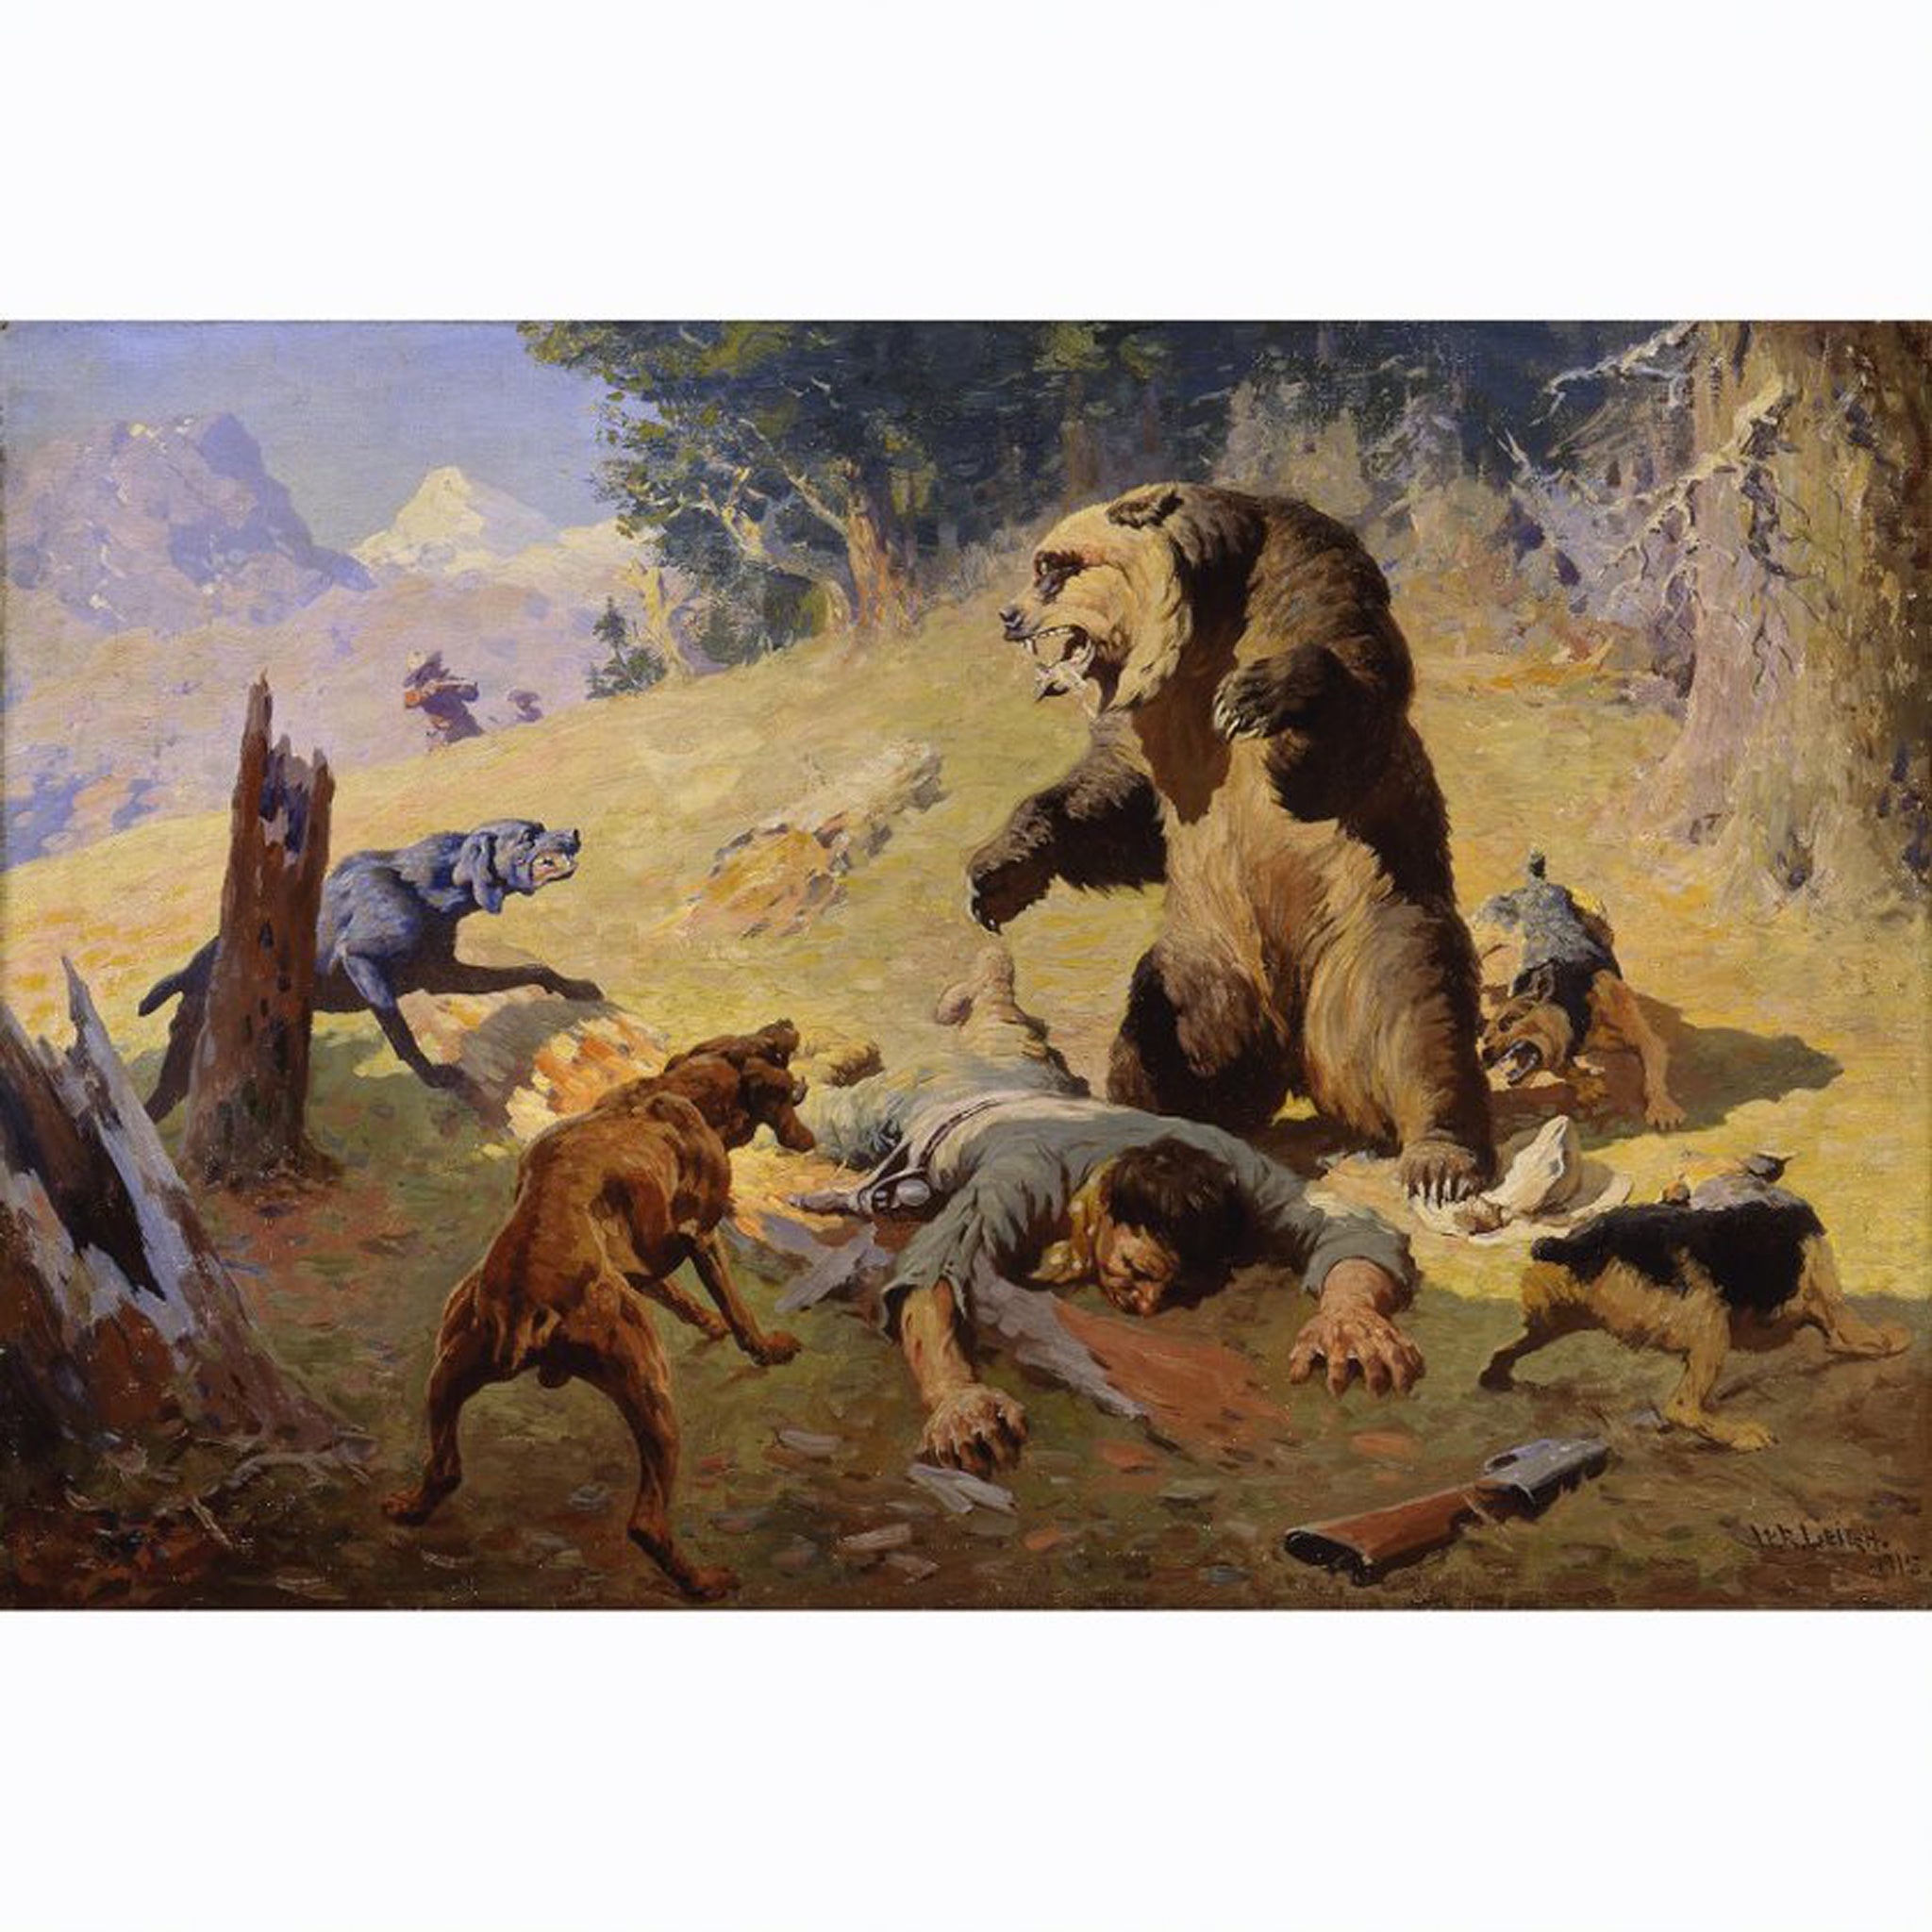 PR 62* GRIZZLY AT BAY BY WILLIAM R. LEIGH #31016672